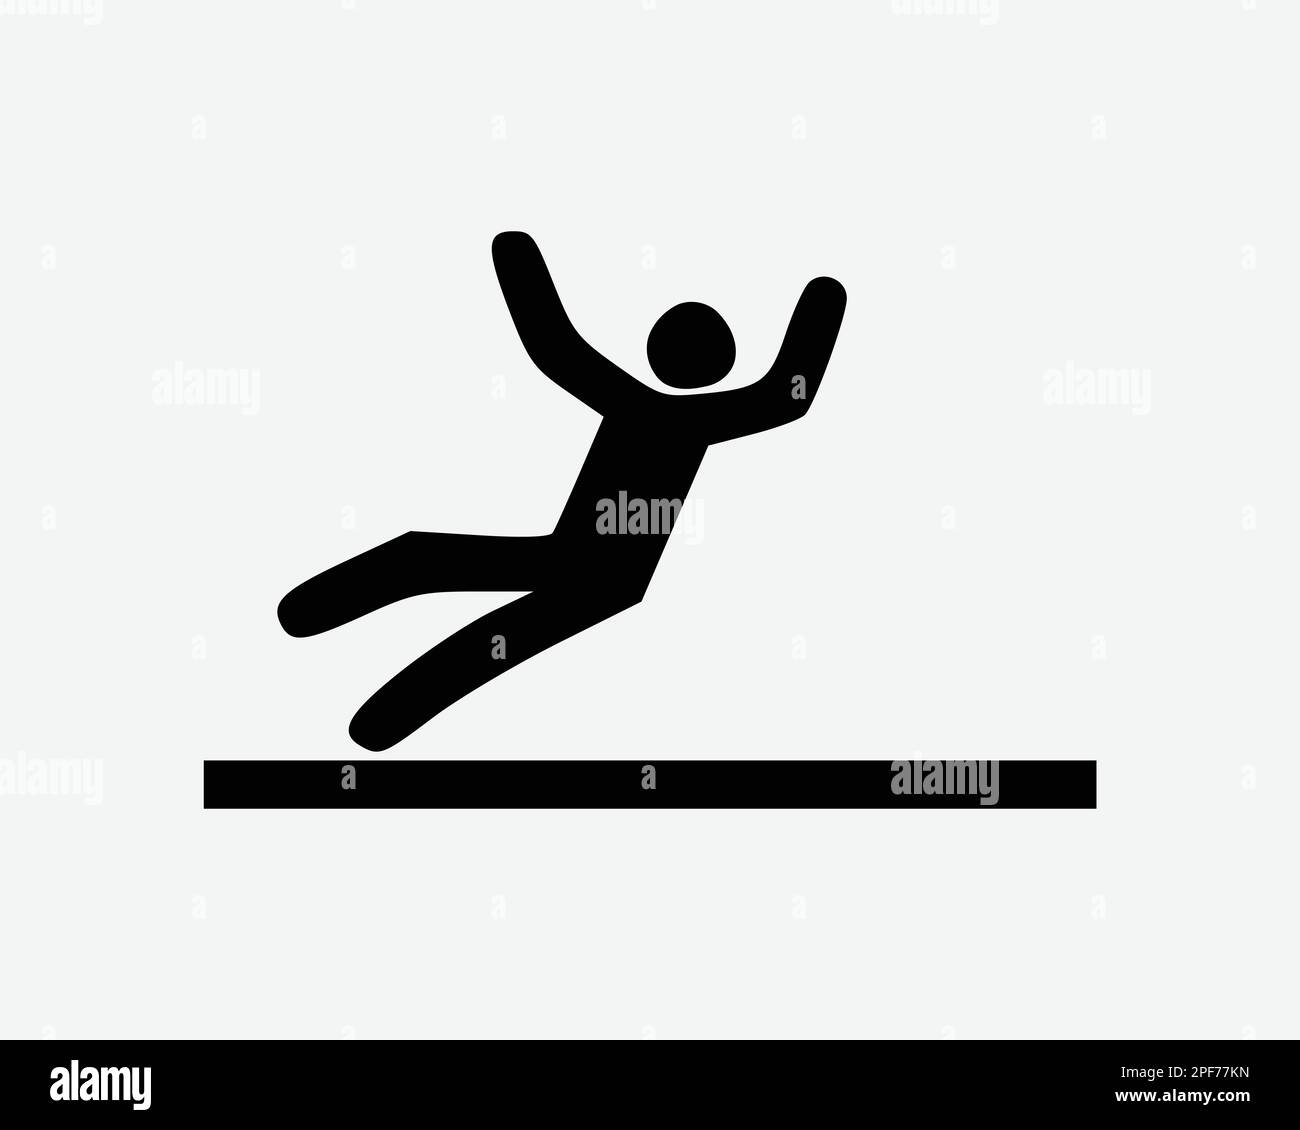 https://c8.alamy.com/comp/2PF77KN/person-falling-icon-slip-and-fall-down-trip-accident-slippery-vector-black-white-silhouette-symbol-sign-graphic-clipart-artwork-illustration-pictogram-2PF77KN.jpg